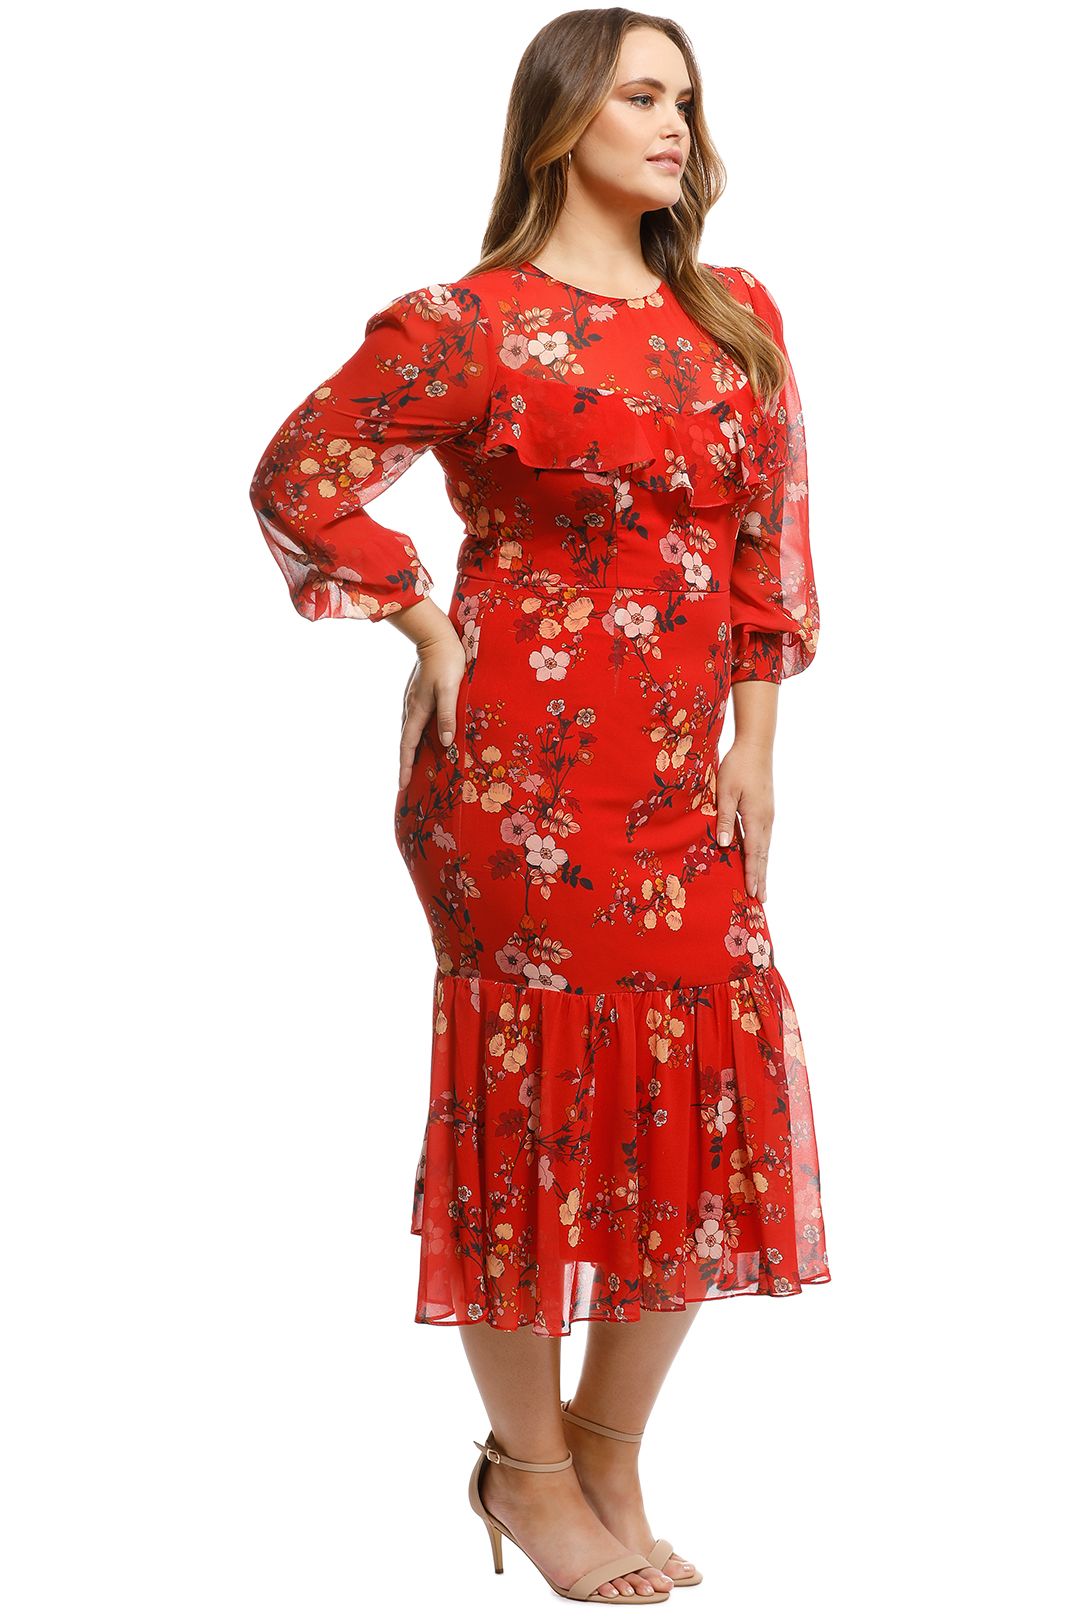 Cooper St - Disco Long Sleeve Fitted Midi Dress - Red - Side